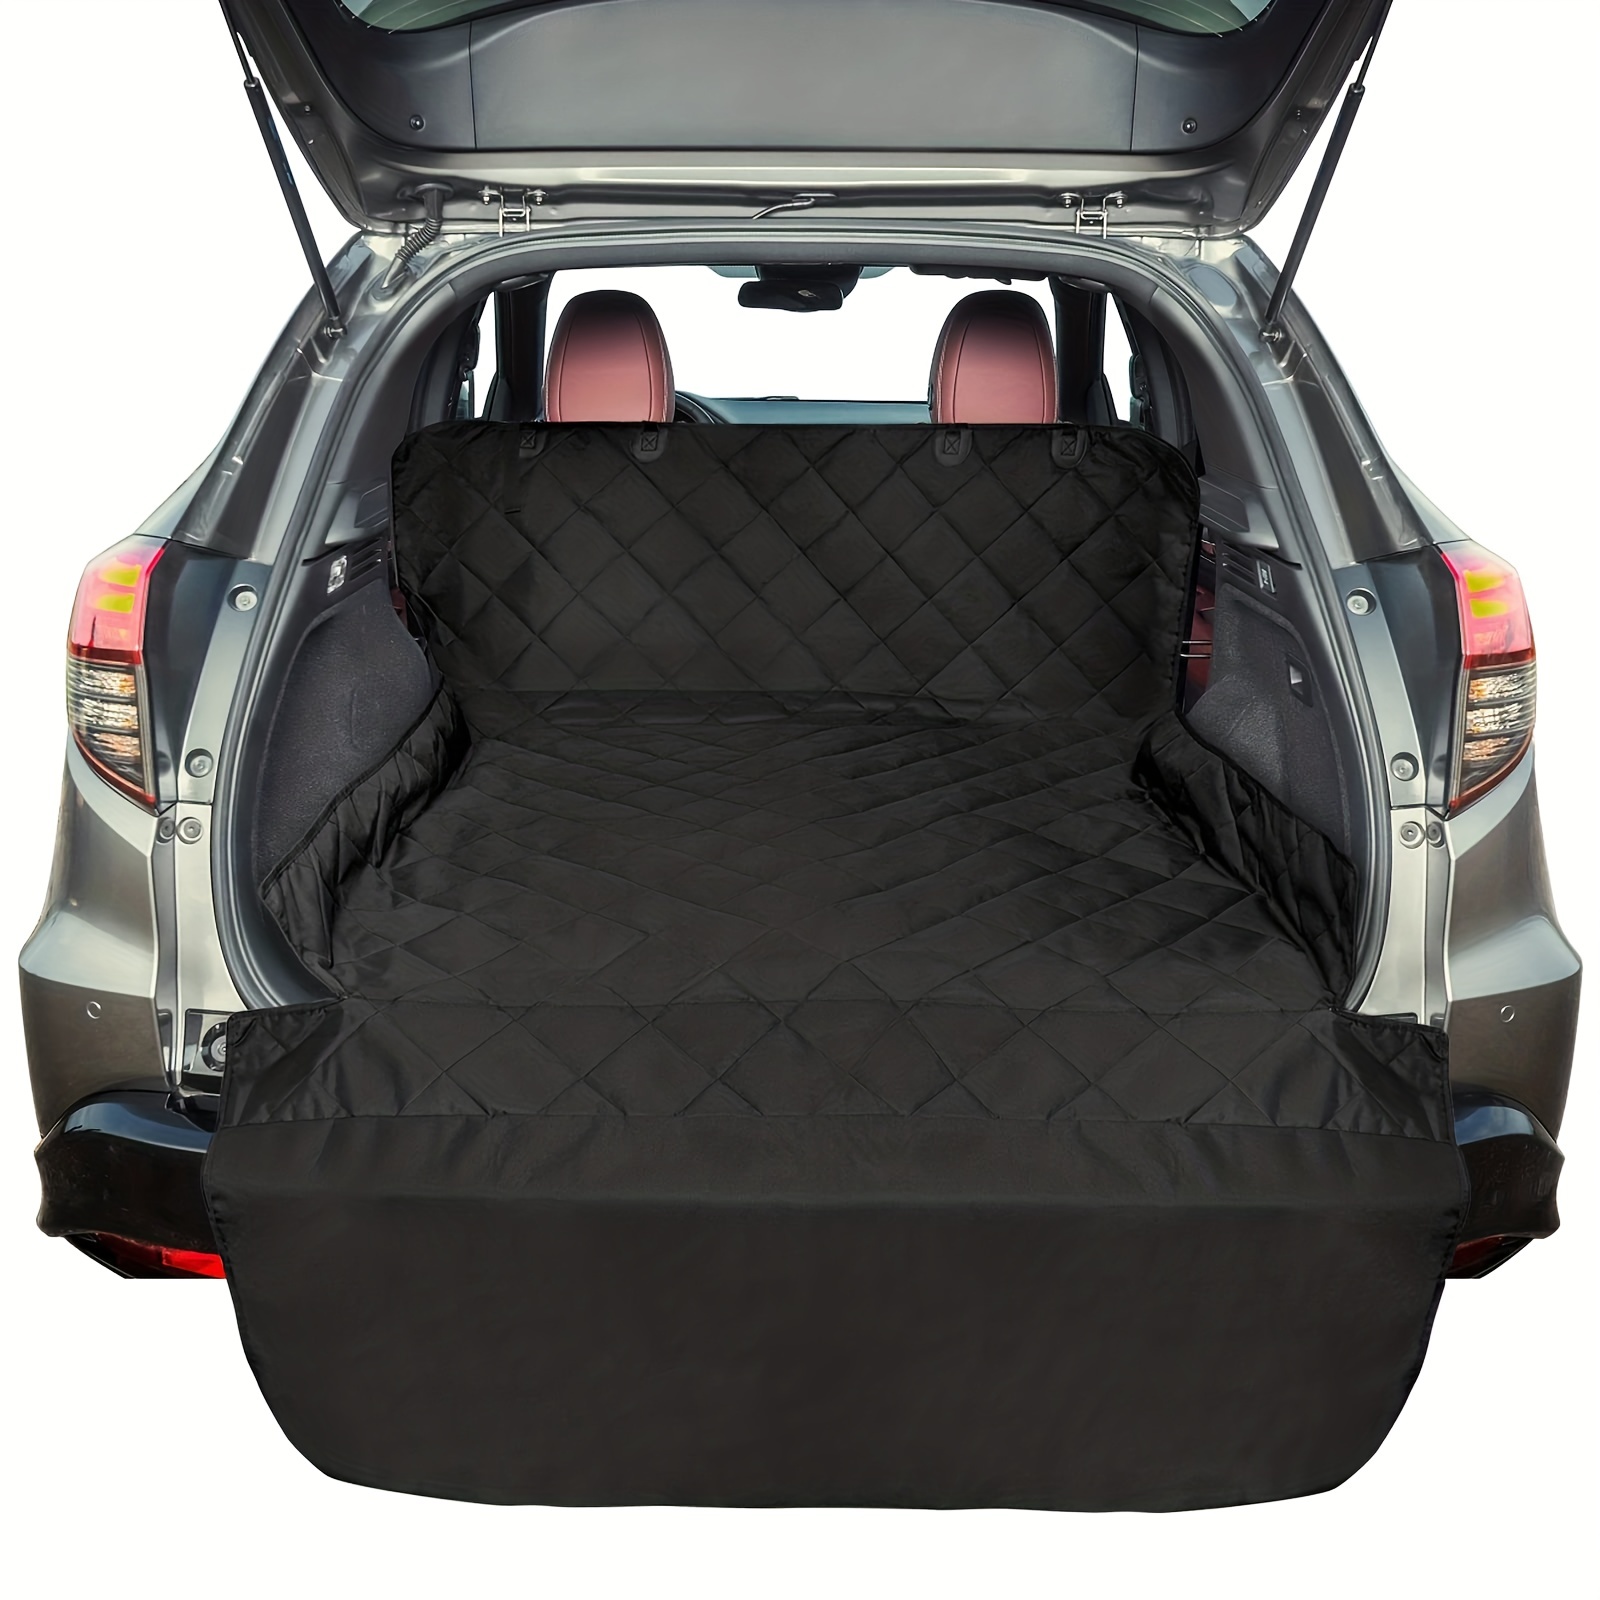  Active Pets Cotton SUV Cargo Liner for Dogs, Durable Non Slip  Vehicle Seat Cover, Protects Against Dirt & Fur, Pet Cargo Liner for SUV &  Trucks, Large Size Trunk Cover for